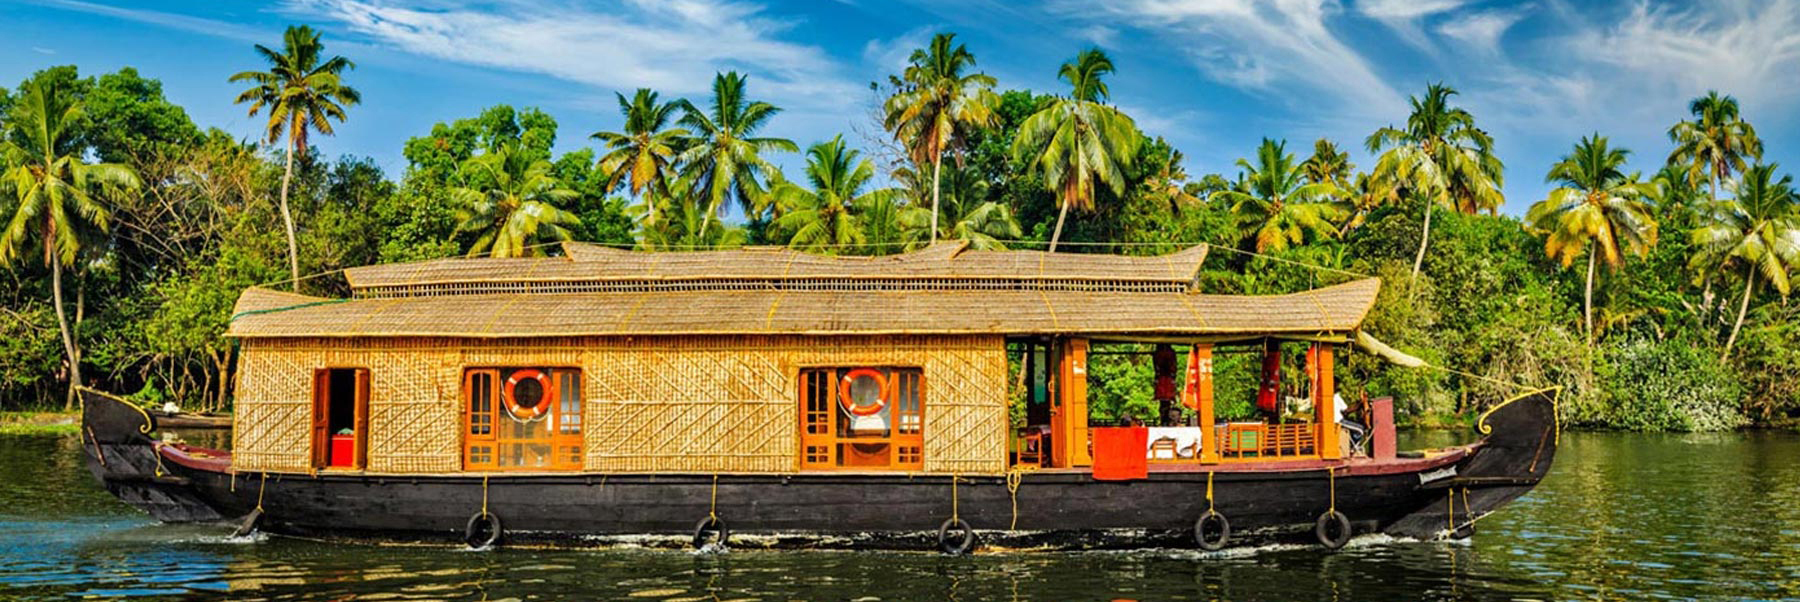 Top 10 Kerala tour Packages Providers